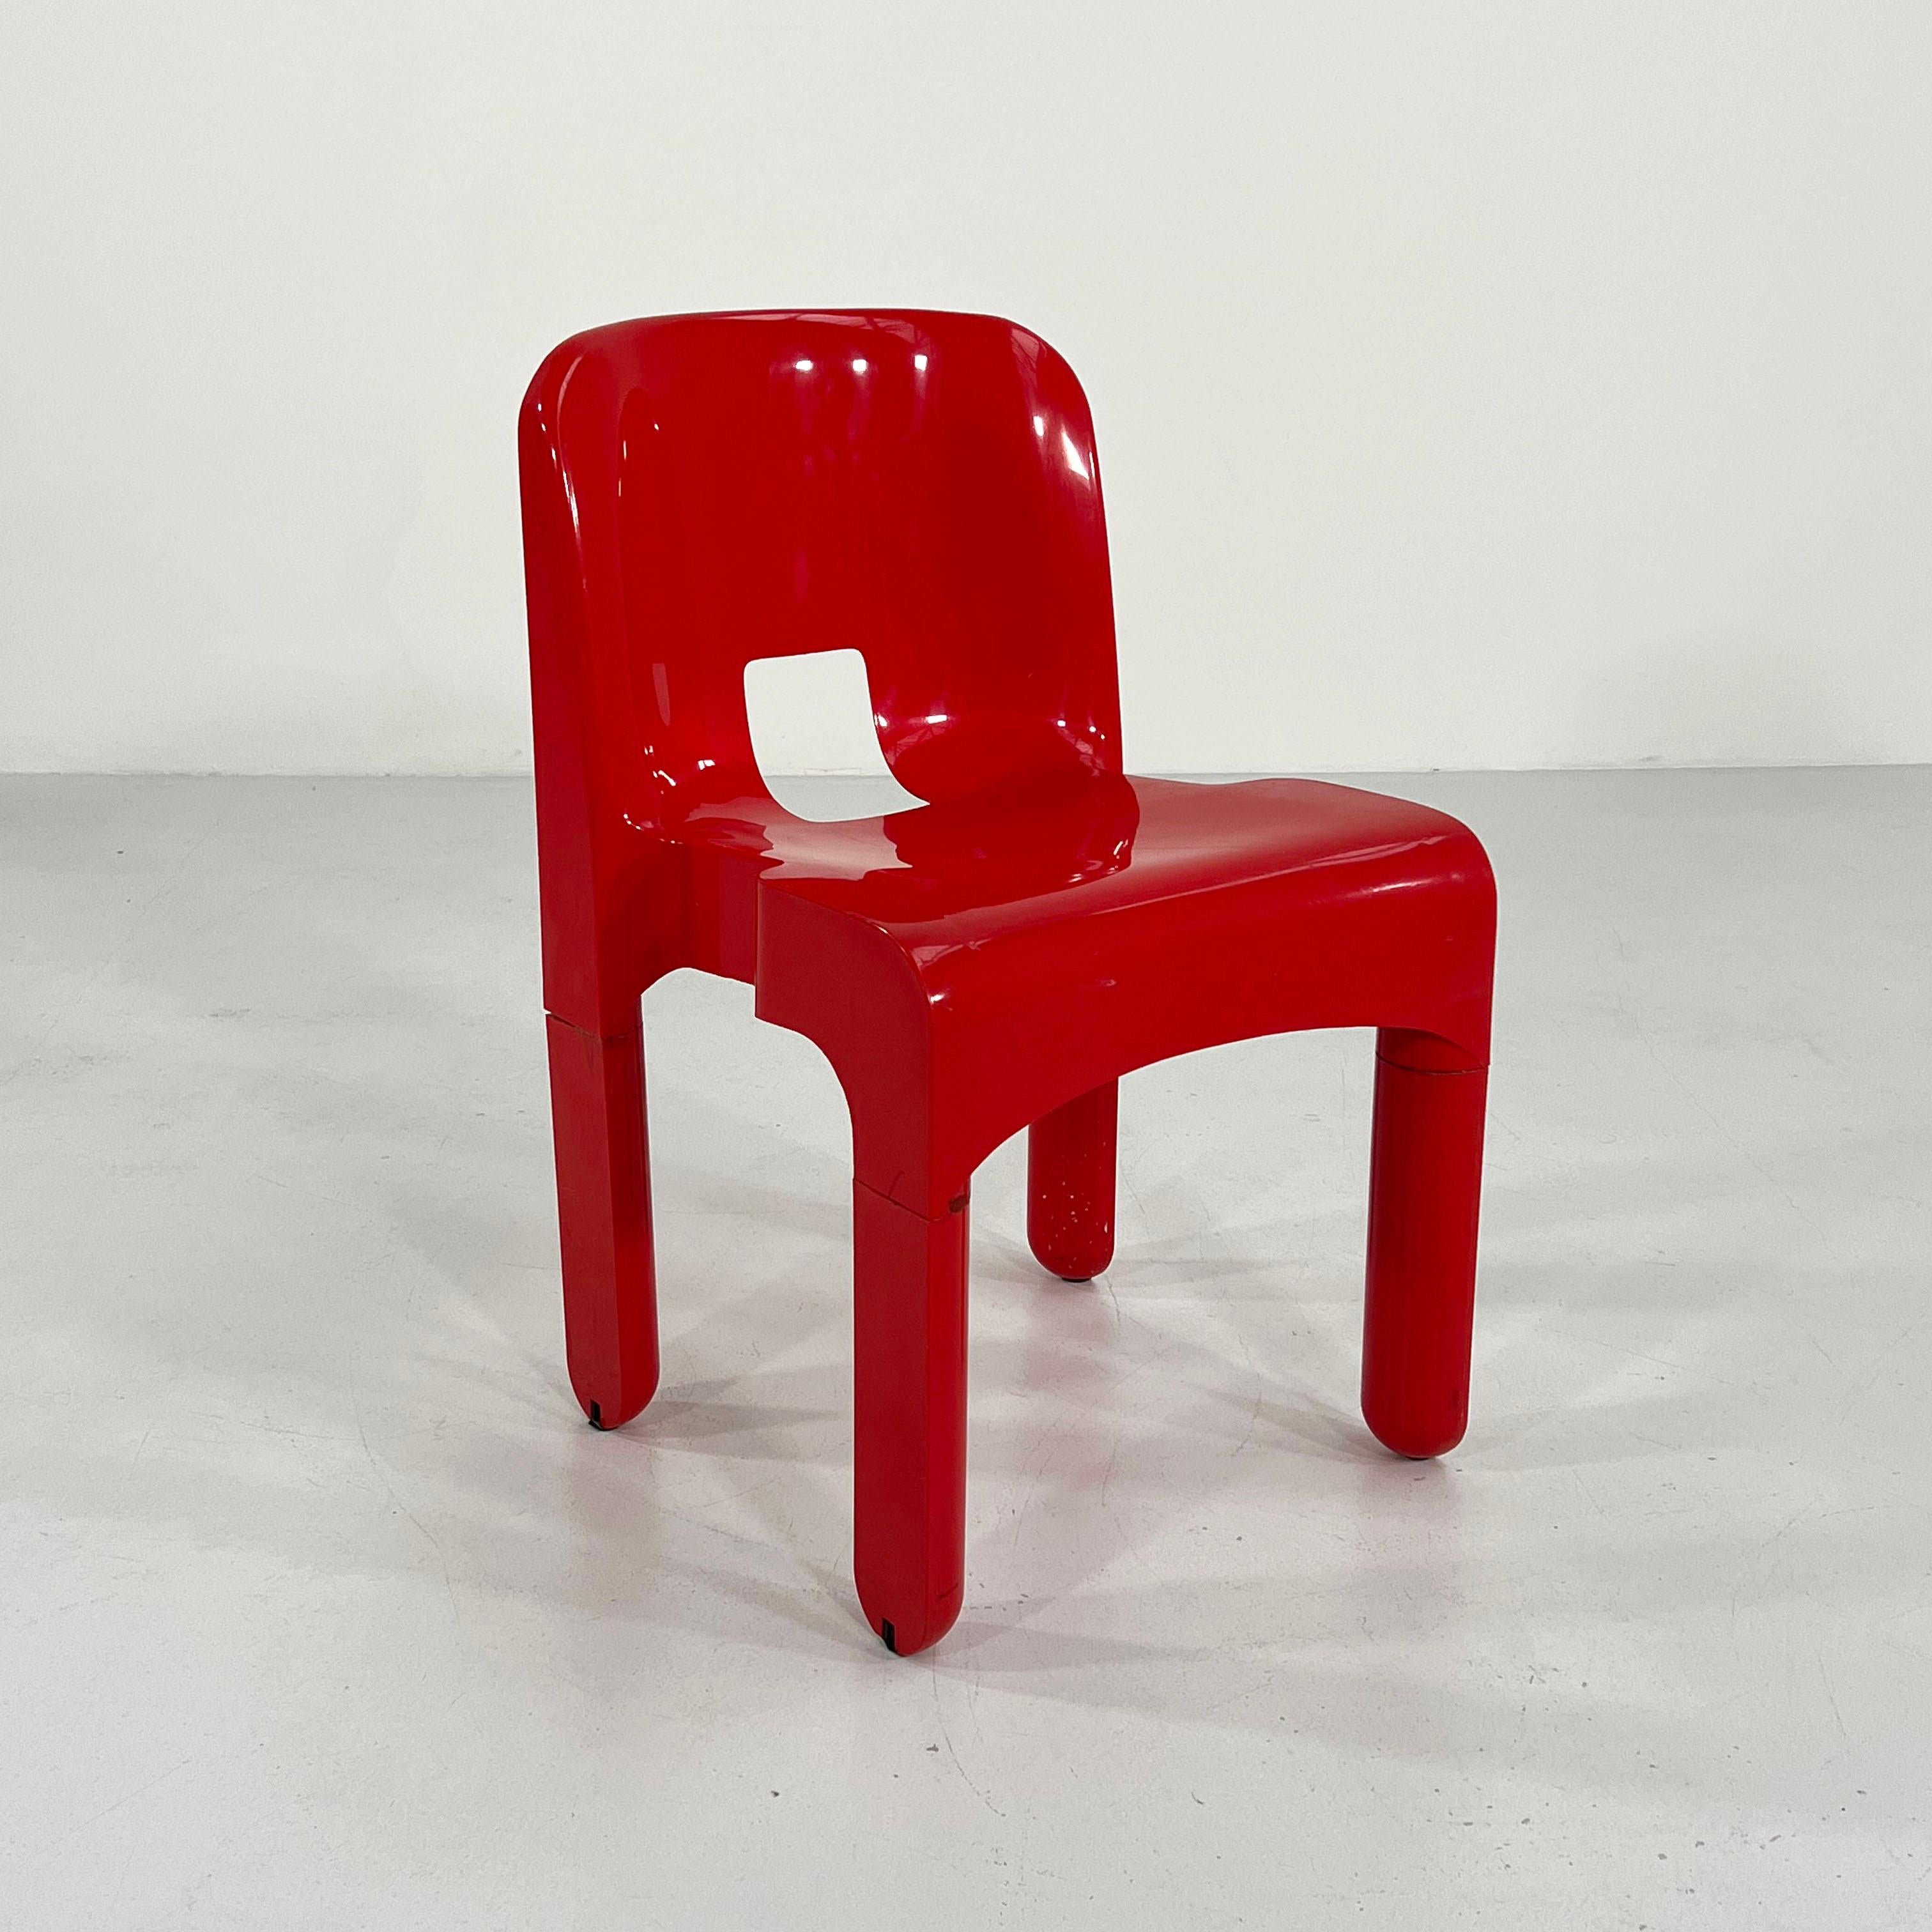 Designer - Joe Colombo
Producer - Kartell
Model - Universale Chair / Model 4869
Design Period - Seventies
Measurements - Width 44 cm x Depth 44 cm x Height 72 cm x Seat Height 45 cm
Materials - Plastic
Color - Red
Condition - Good 
Comments